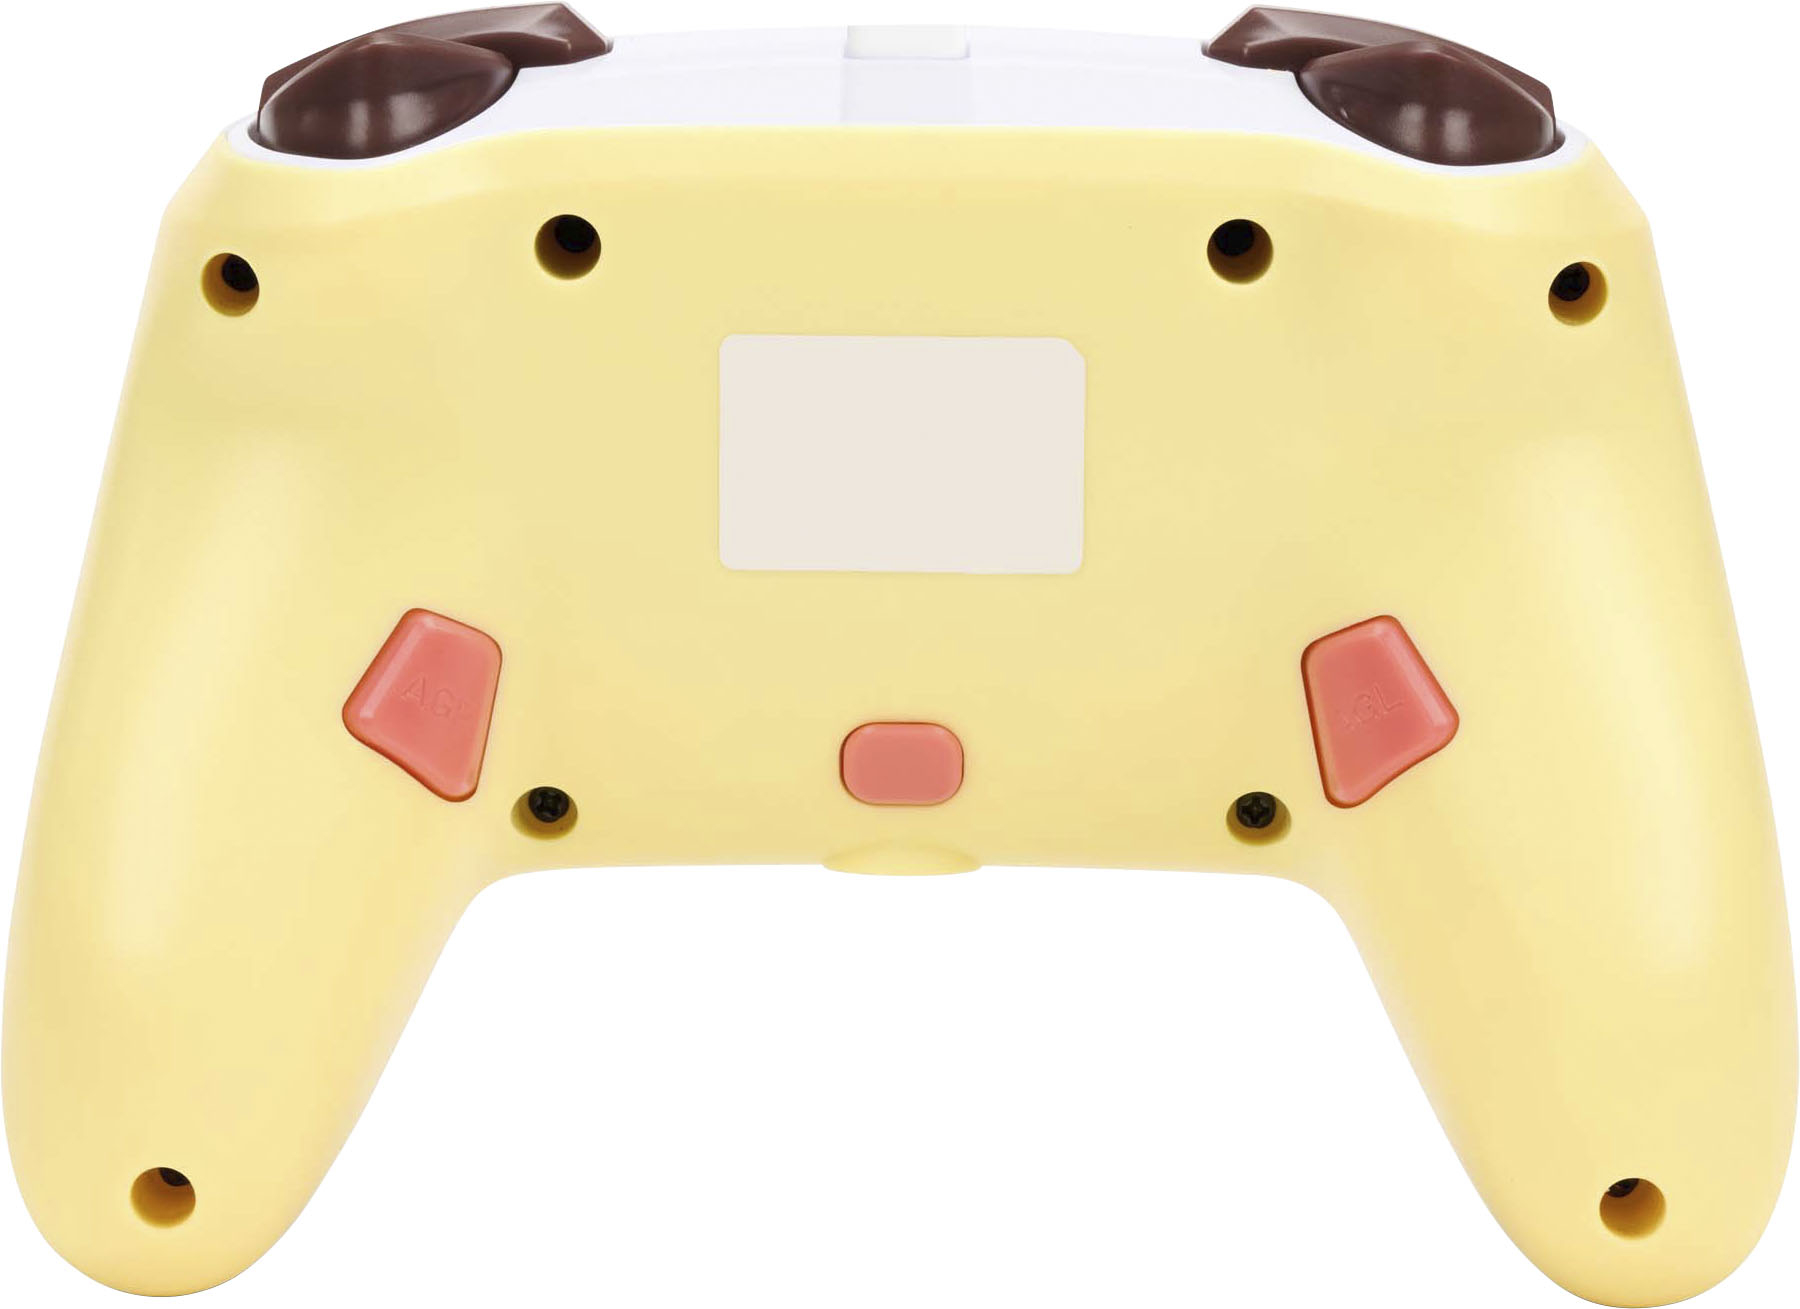 Back View: PowerA Enhanced Wired Controller for Nintendo Switch - Pikachu Electric Type